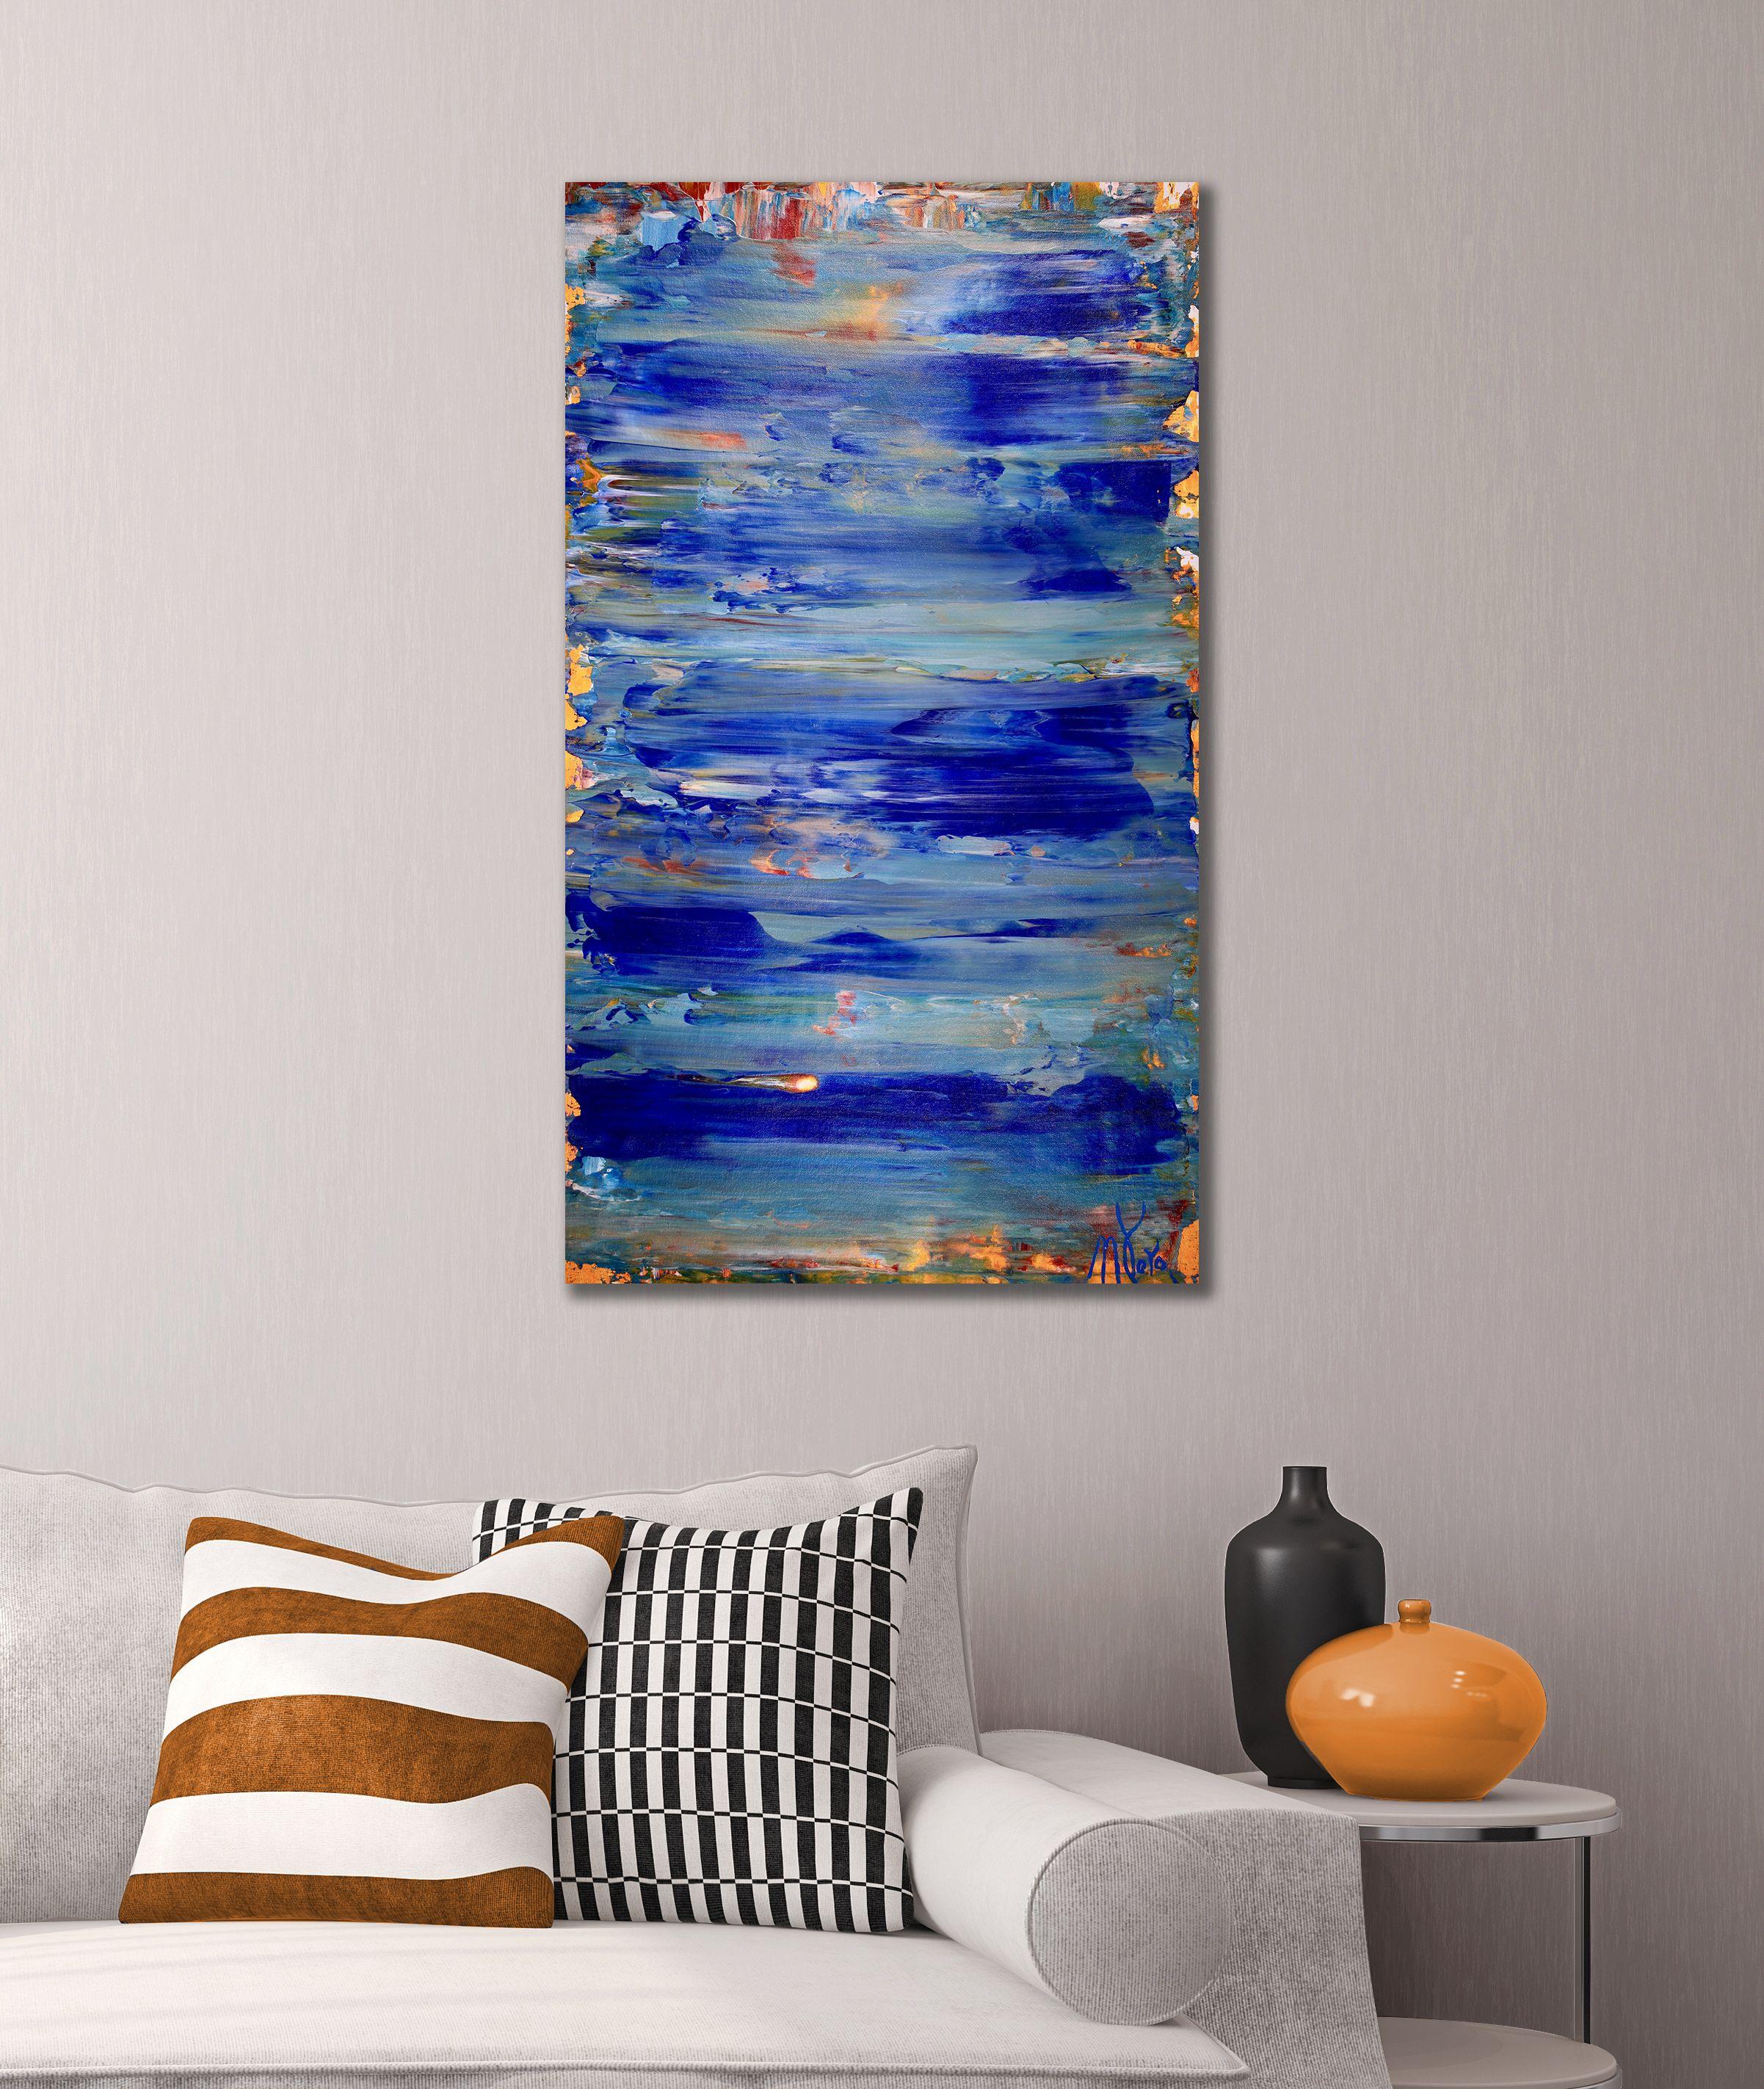 Mediterraneo, Painting, Acrylic on Canvas - Blue Abstract Painting by Nestor Toro